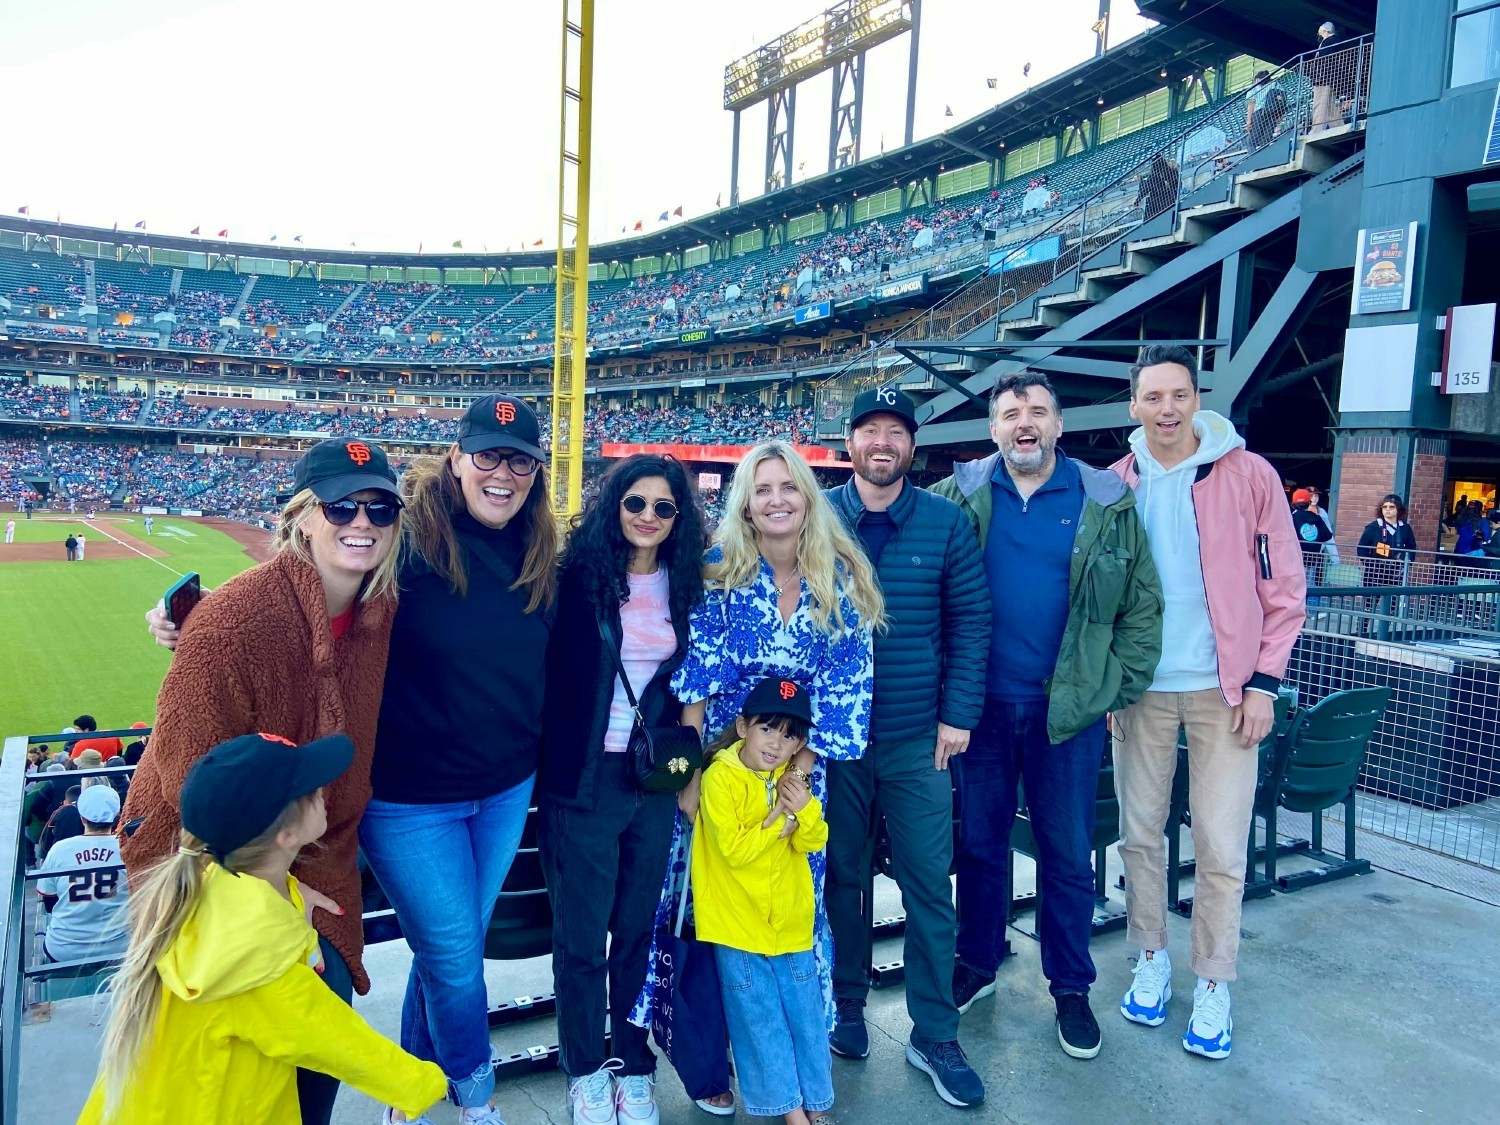 Ellie P., Jen G., Pooja C., Mandy E., Eric W., Jack M. & Dan W. at our team outing to the San Francisco Giants.